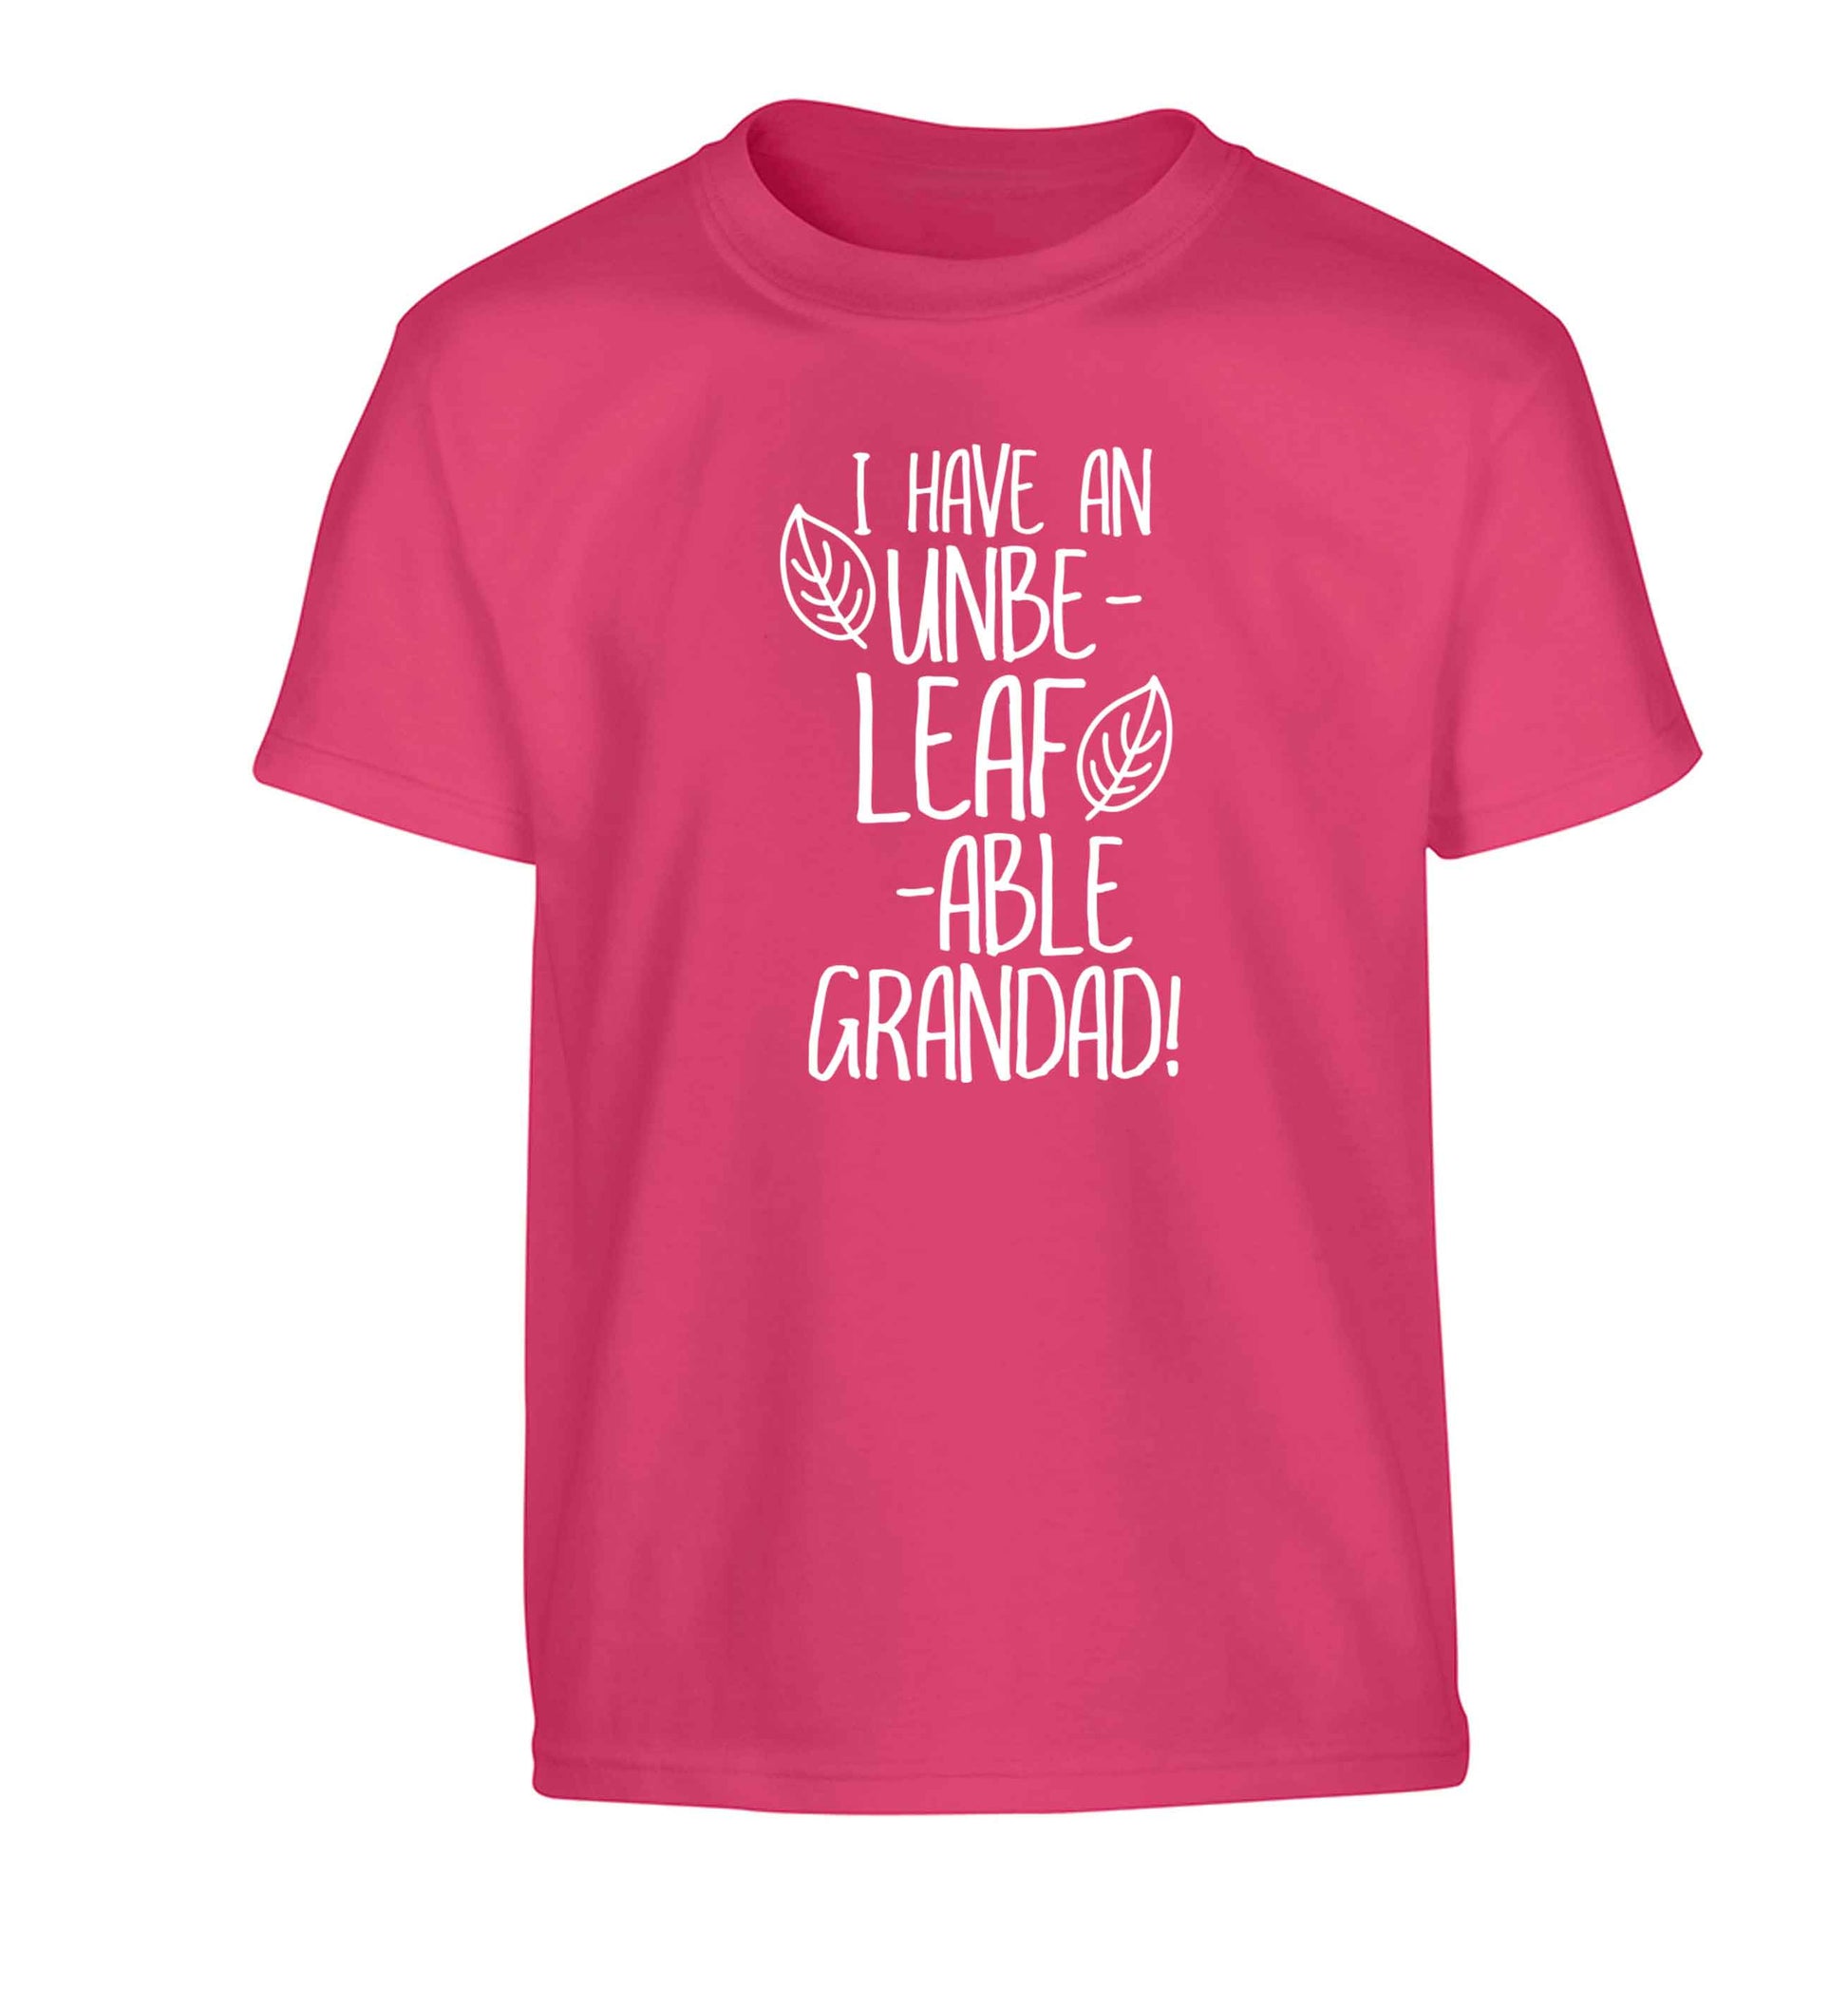 I have an unbe-leaf-able grandad Children's pink Tshirt 12-13 Years